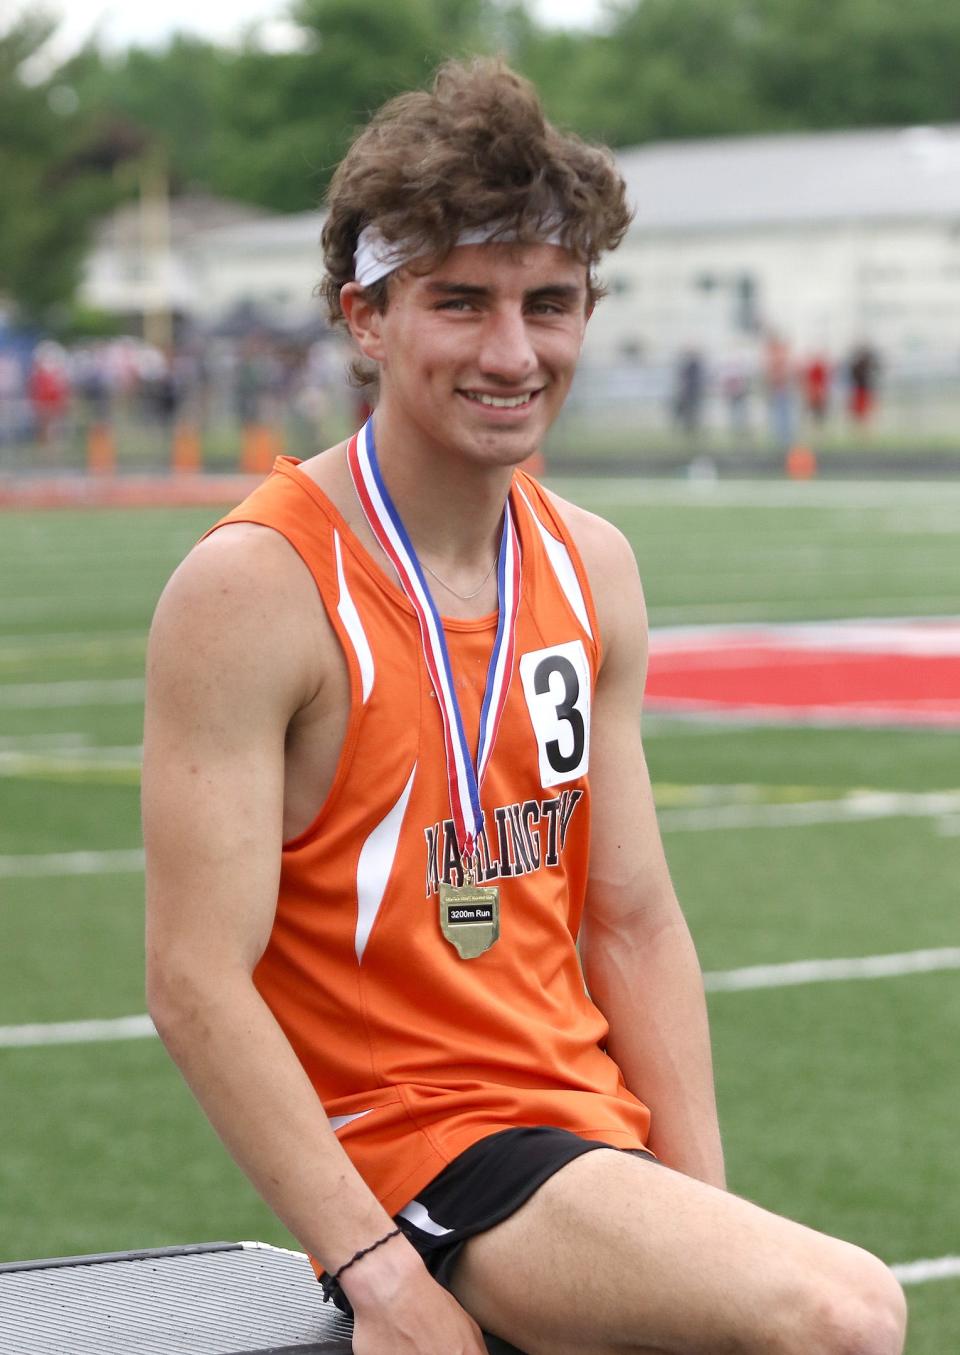 Marlington's Noah Graham placed first in the boys 3200 meter final at the Division II track and field regional finals held at Austintown Fitch High School, Saturday, May 28, 2022.